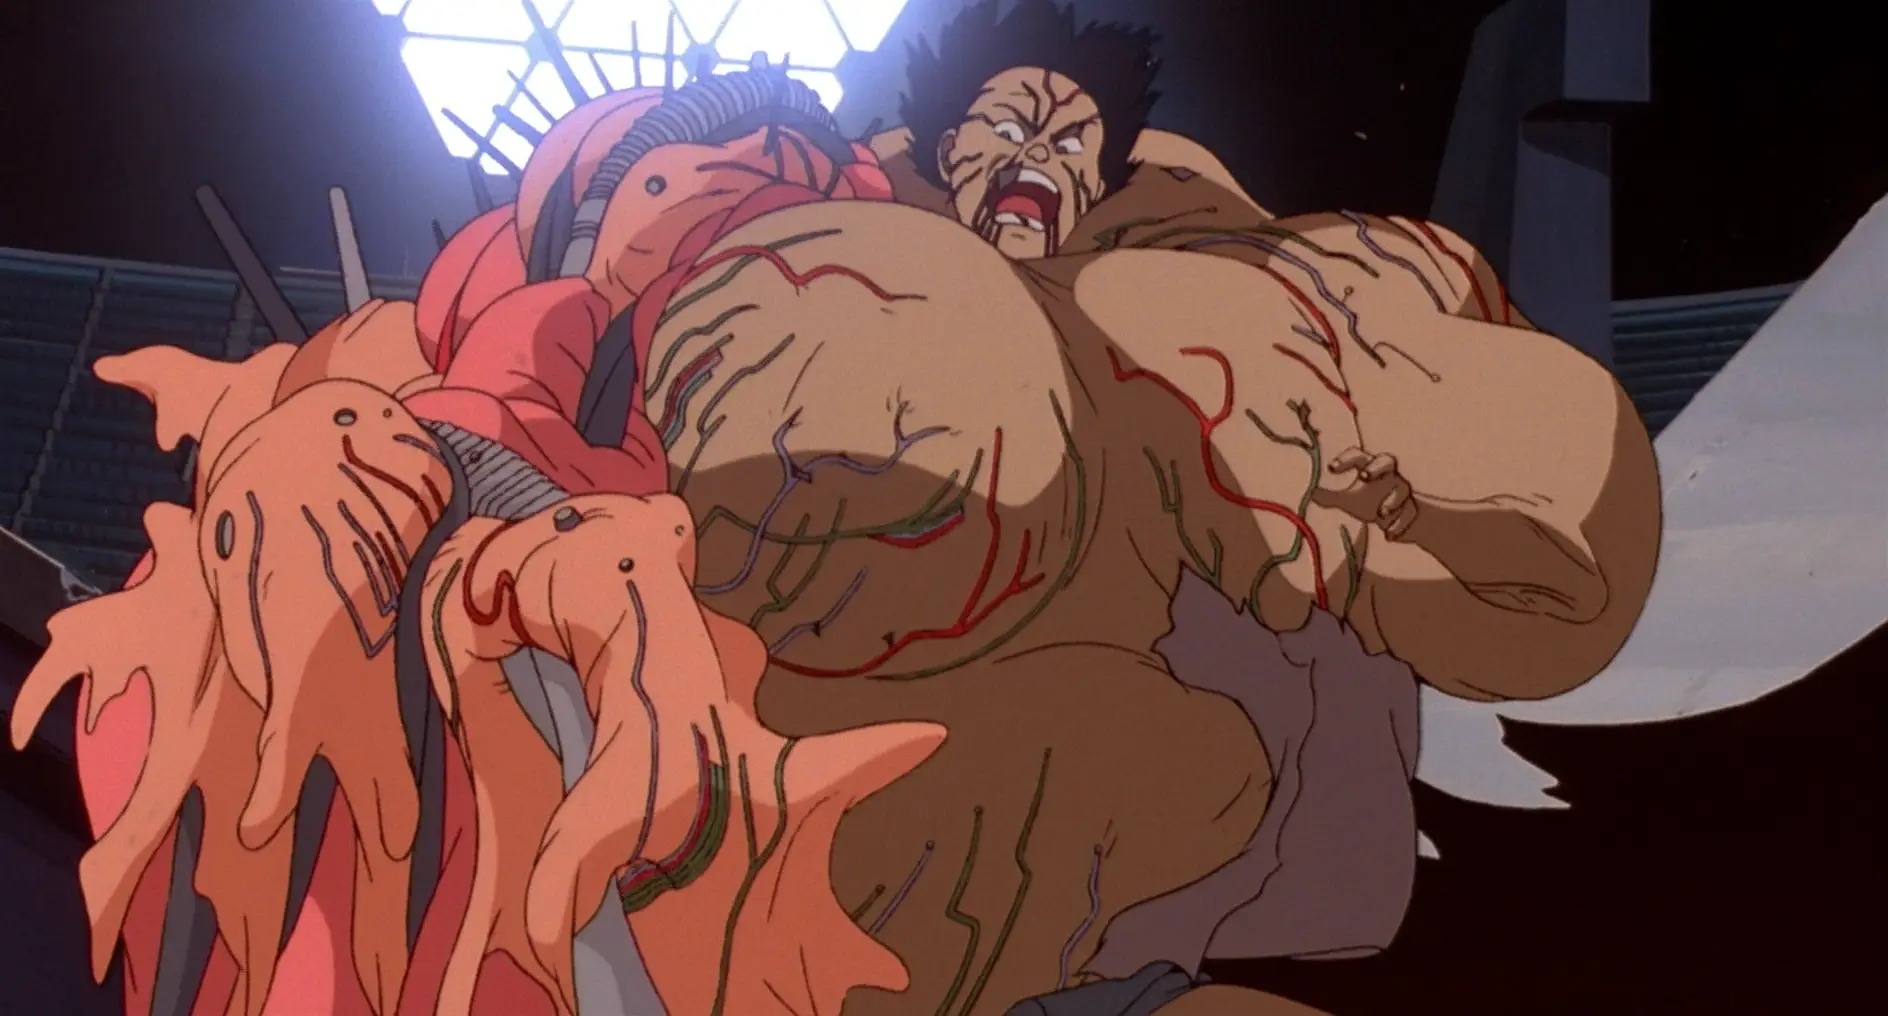 Still from Akira. Tetsuo has started to transform. His muscles bulge grotesquely, with the exception of one forearm which now appears comically small..